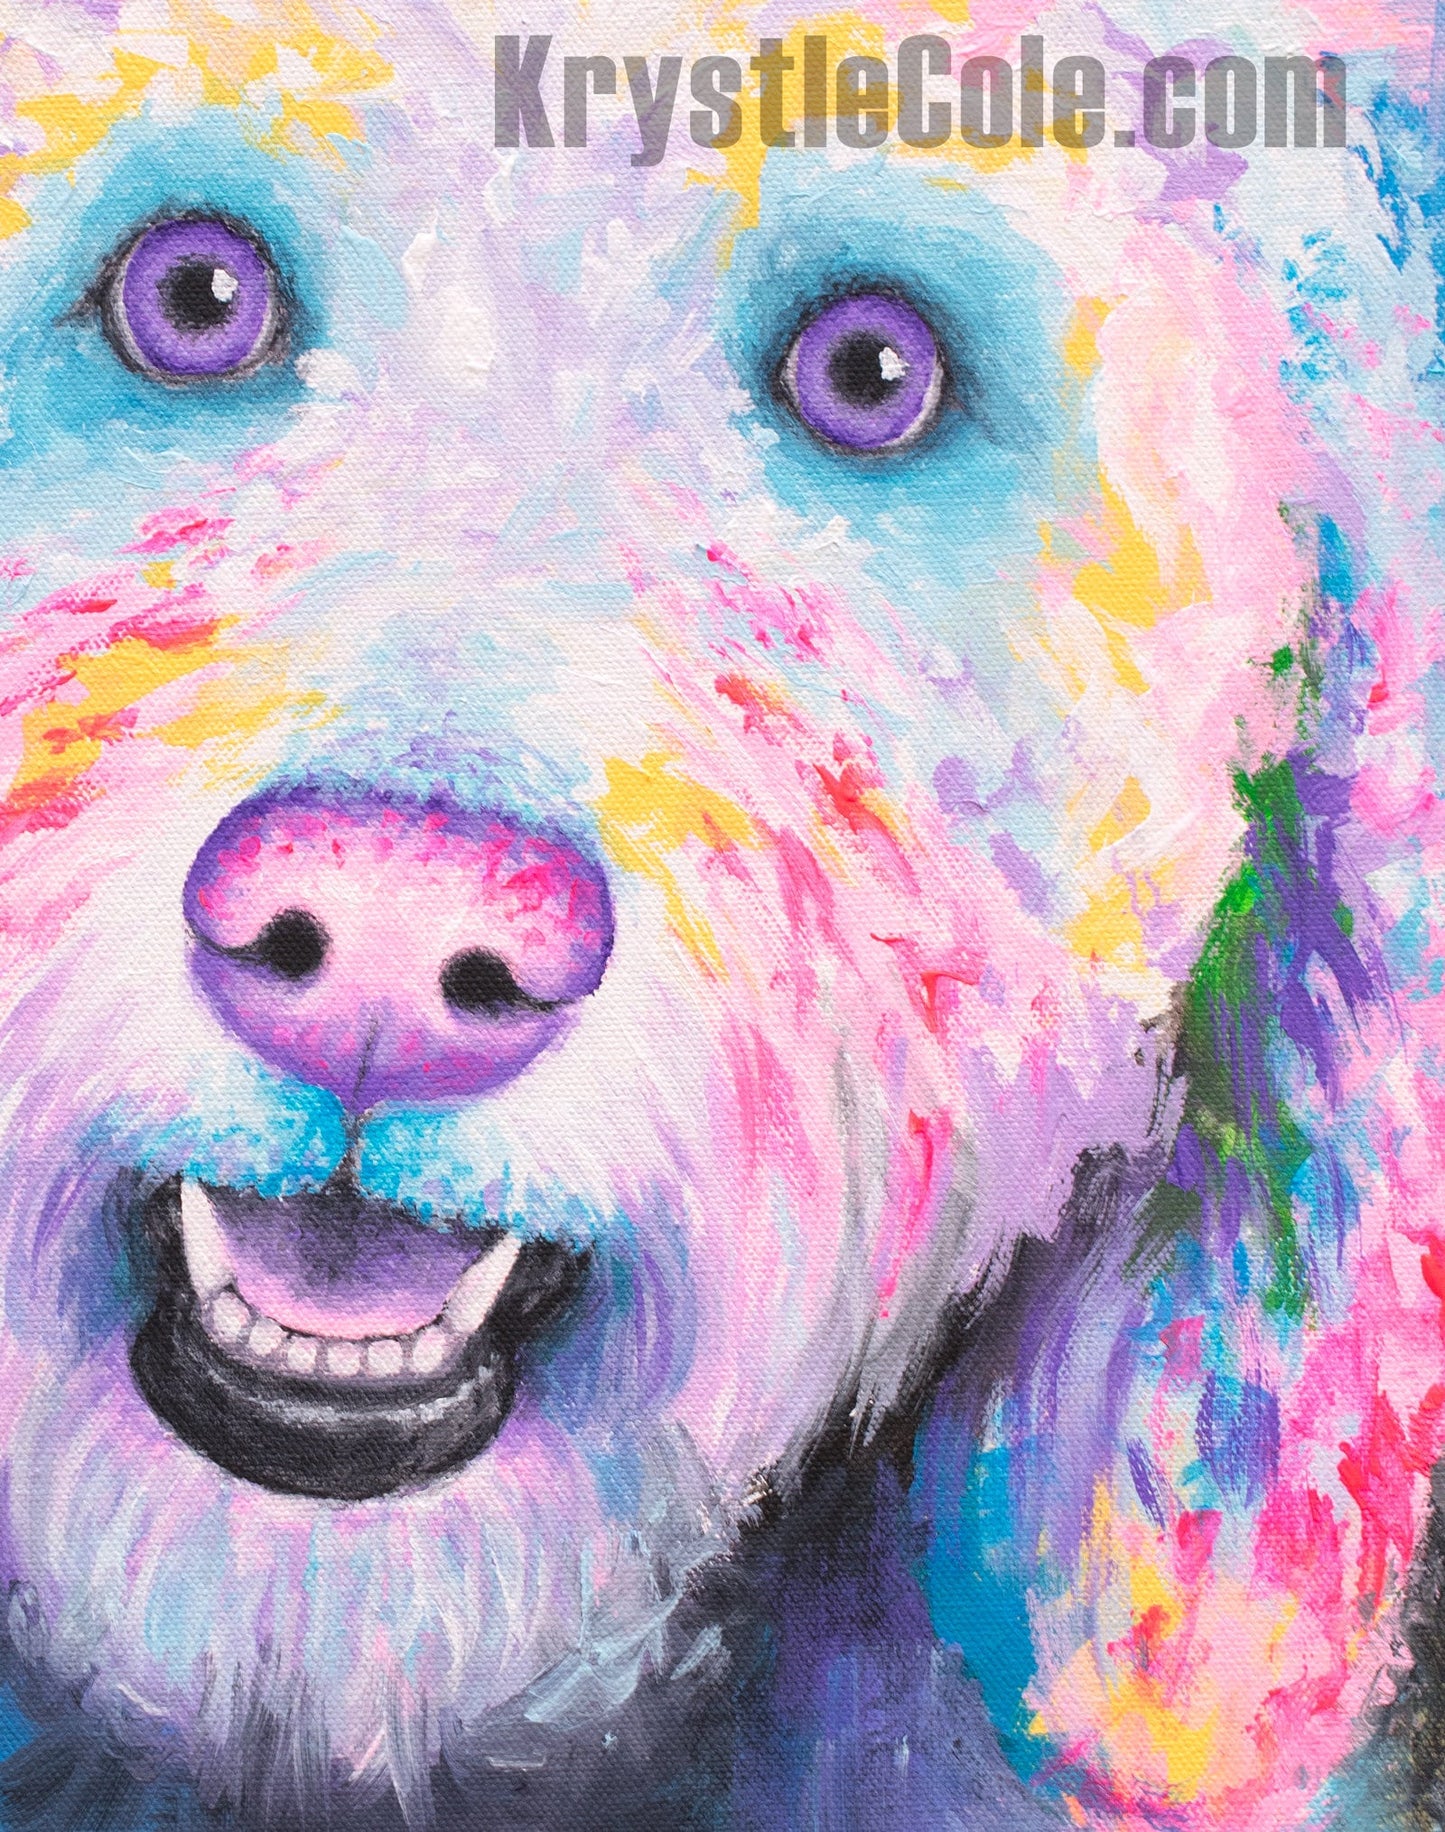 Goldendoodle Art Print CANVAS or PAPER - Golden Doodle Gifts. Painting by Krystle Cole